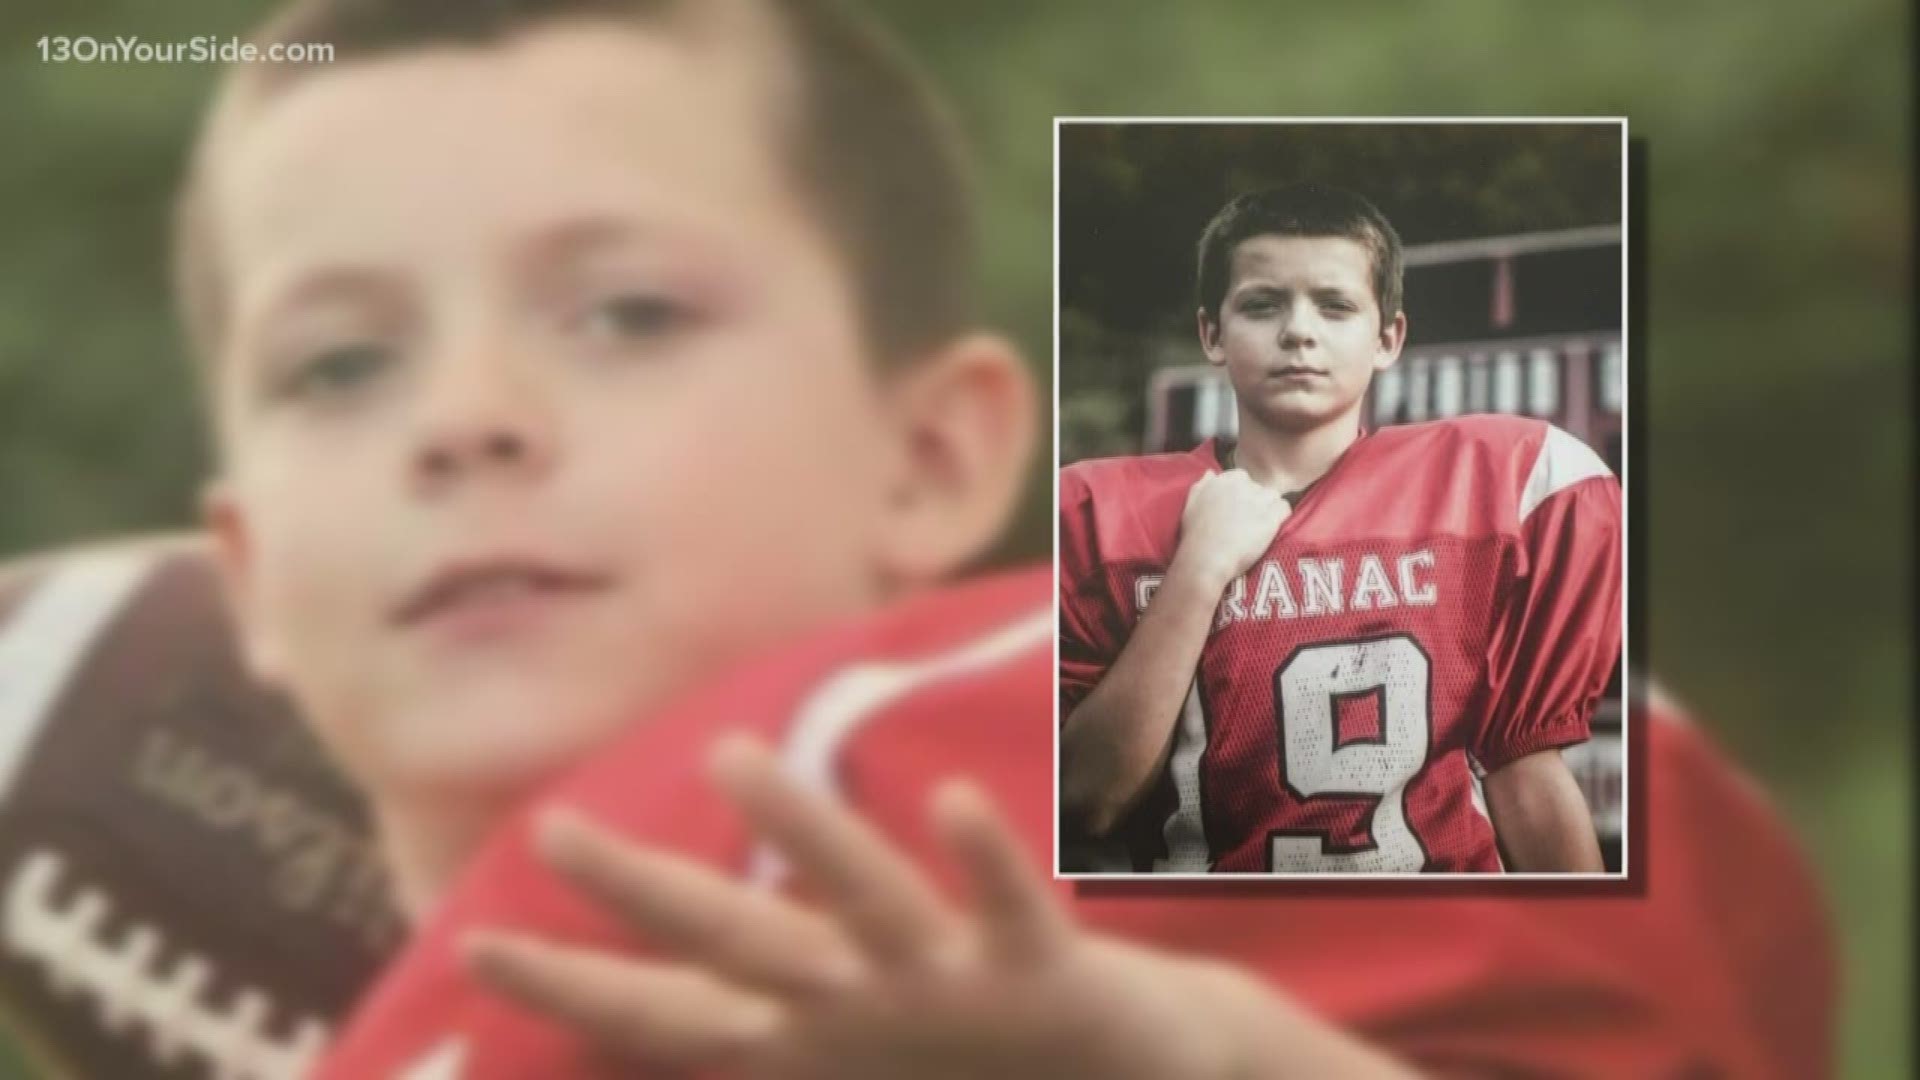 Heart complications led to death of 12-year-old Saranac football player